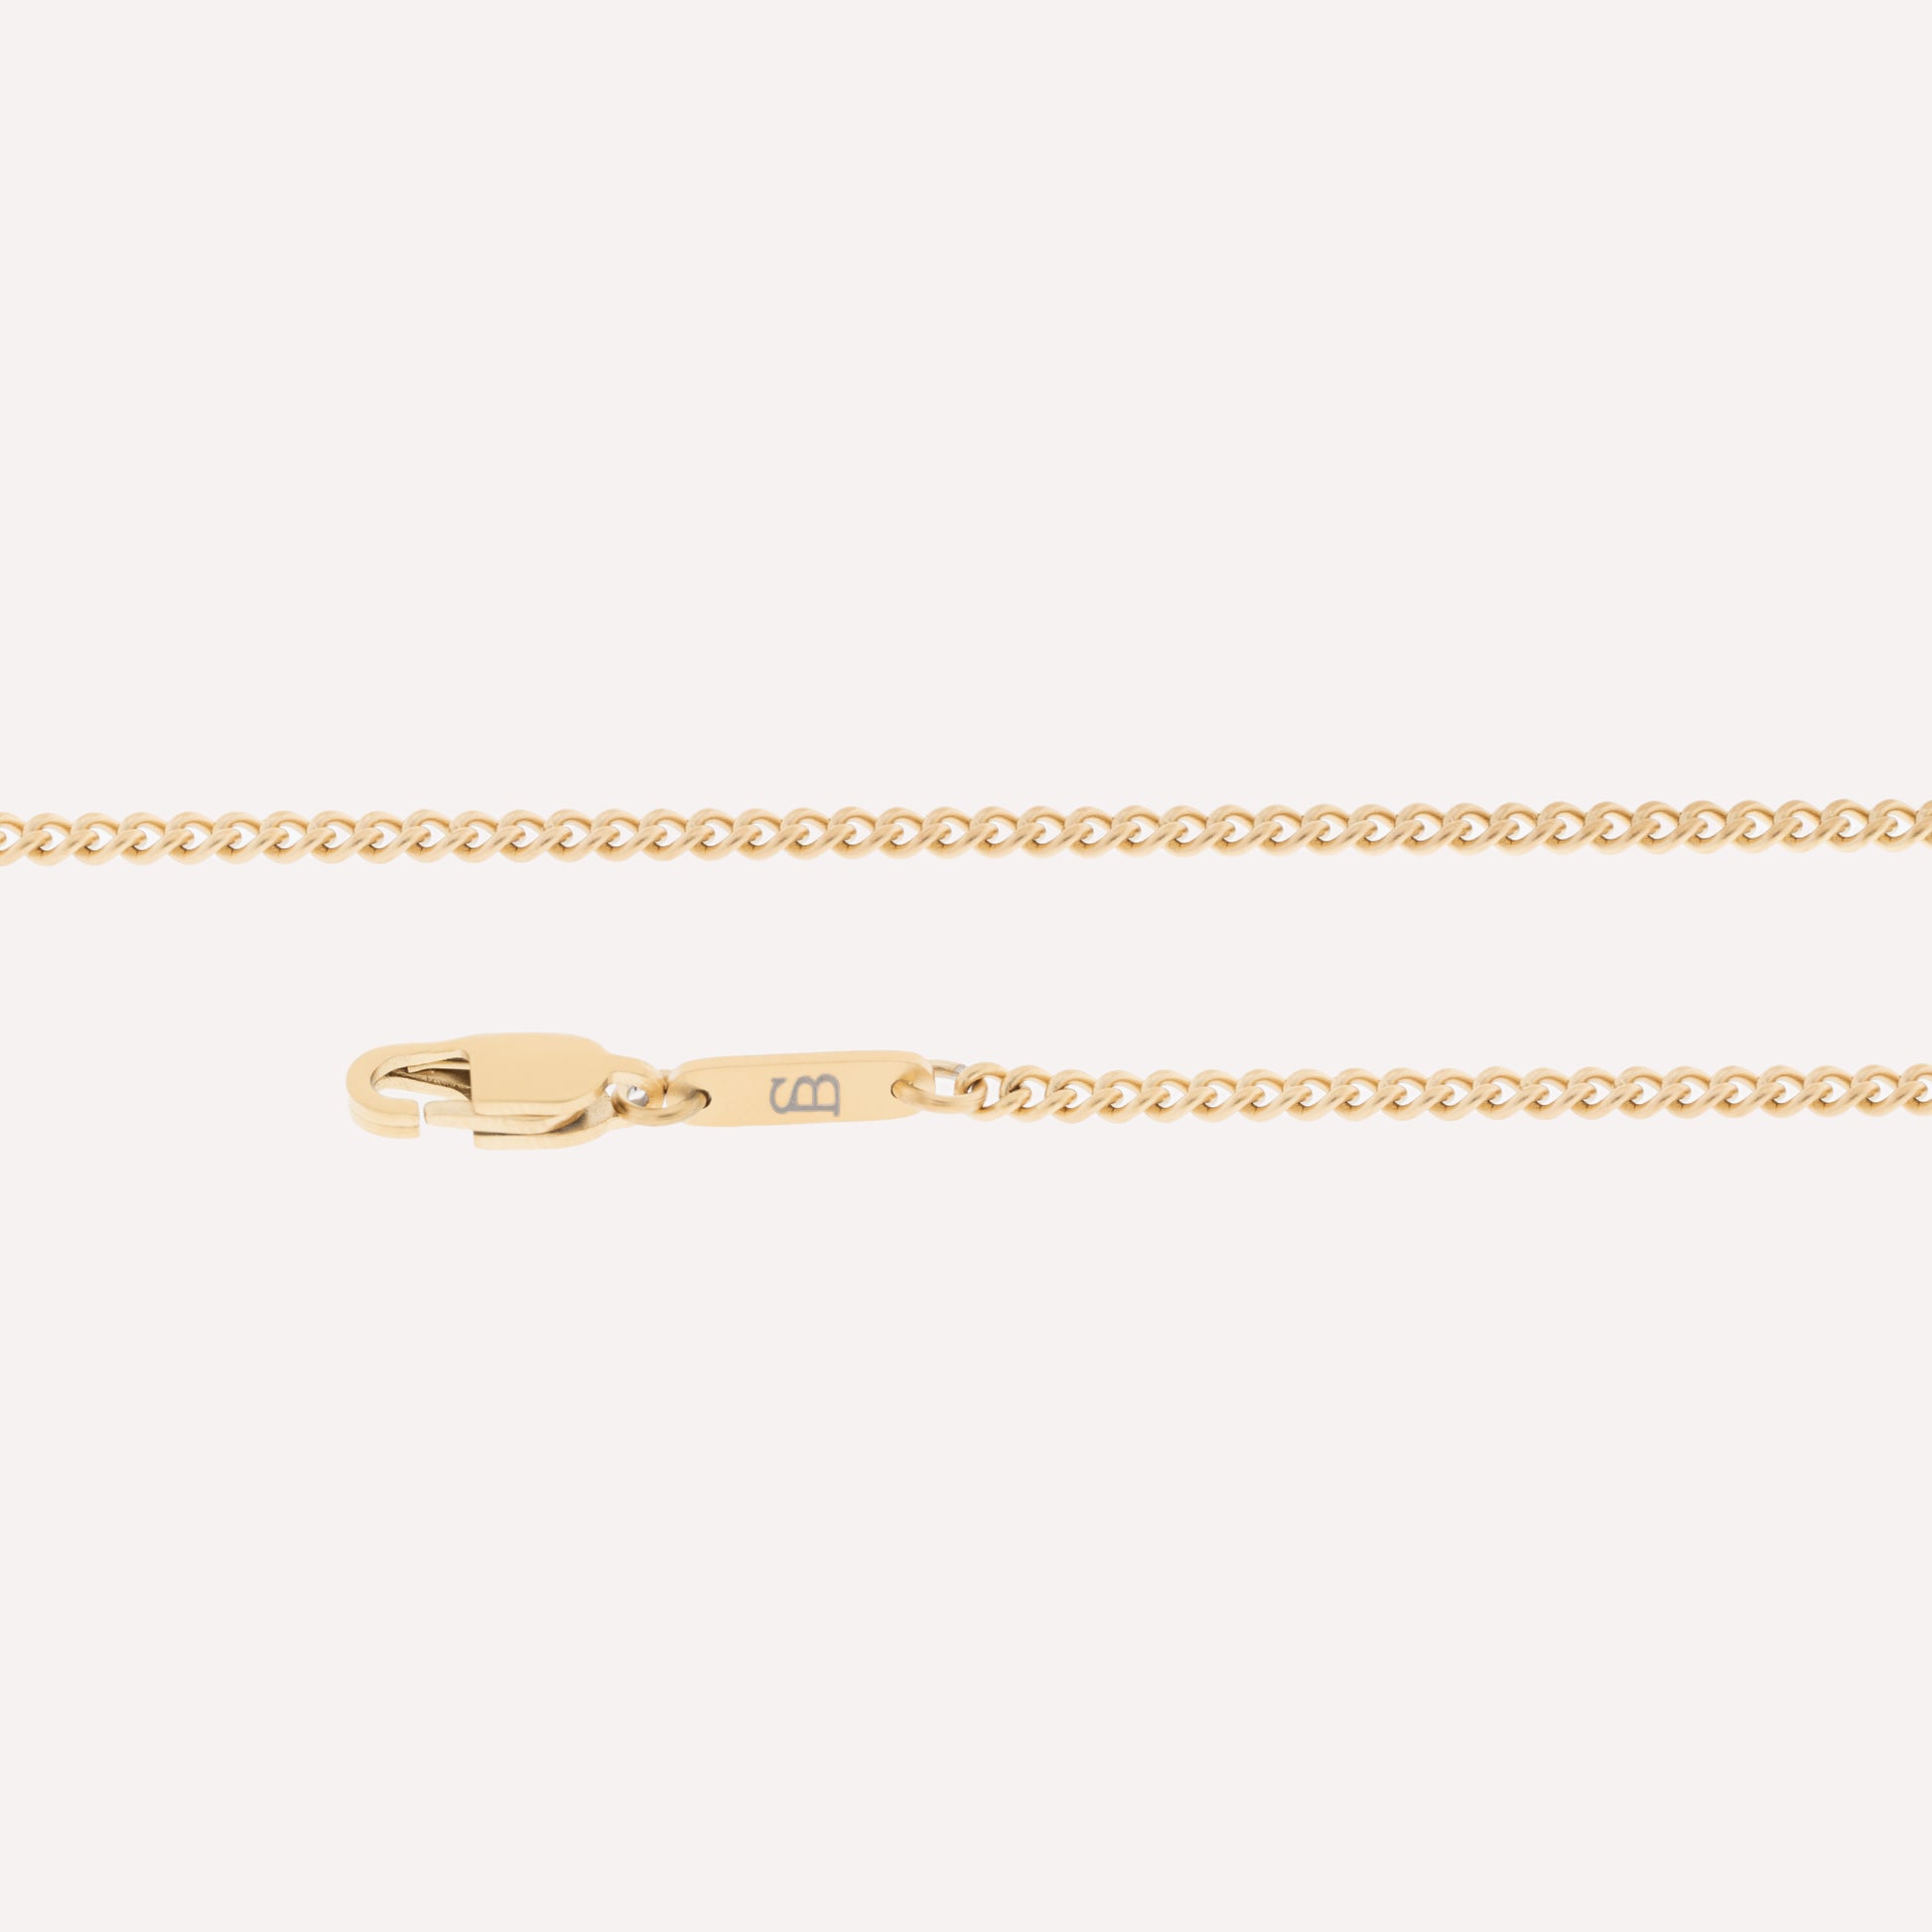 minimal gold chain for men necklace stainless steel steel and barnett Minimal Chain Necklace 18K Gold Adjustable 50-60cm/20-24'